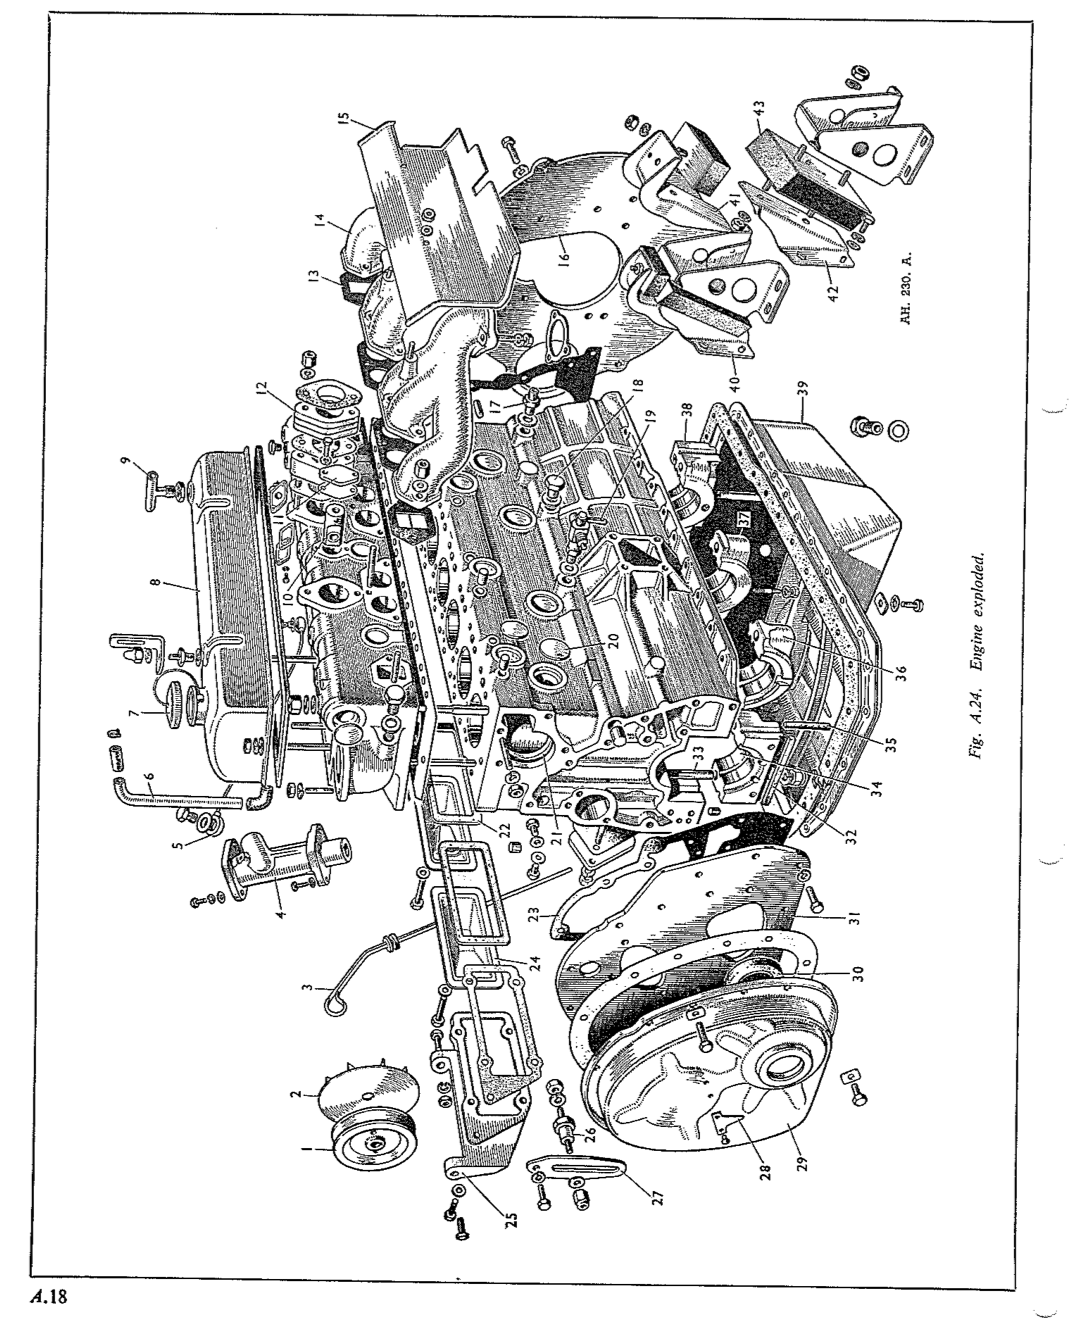 Fig A.24. Engine exploded